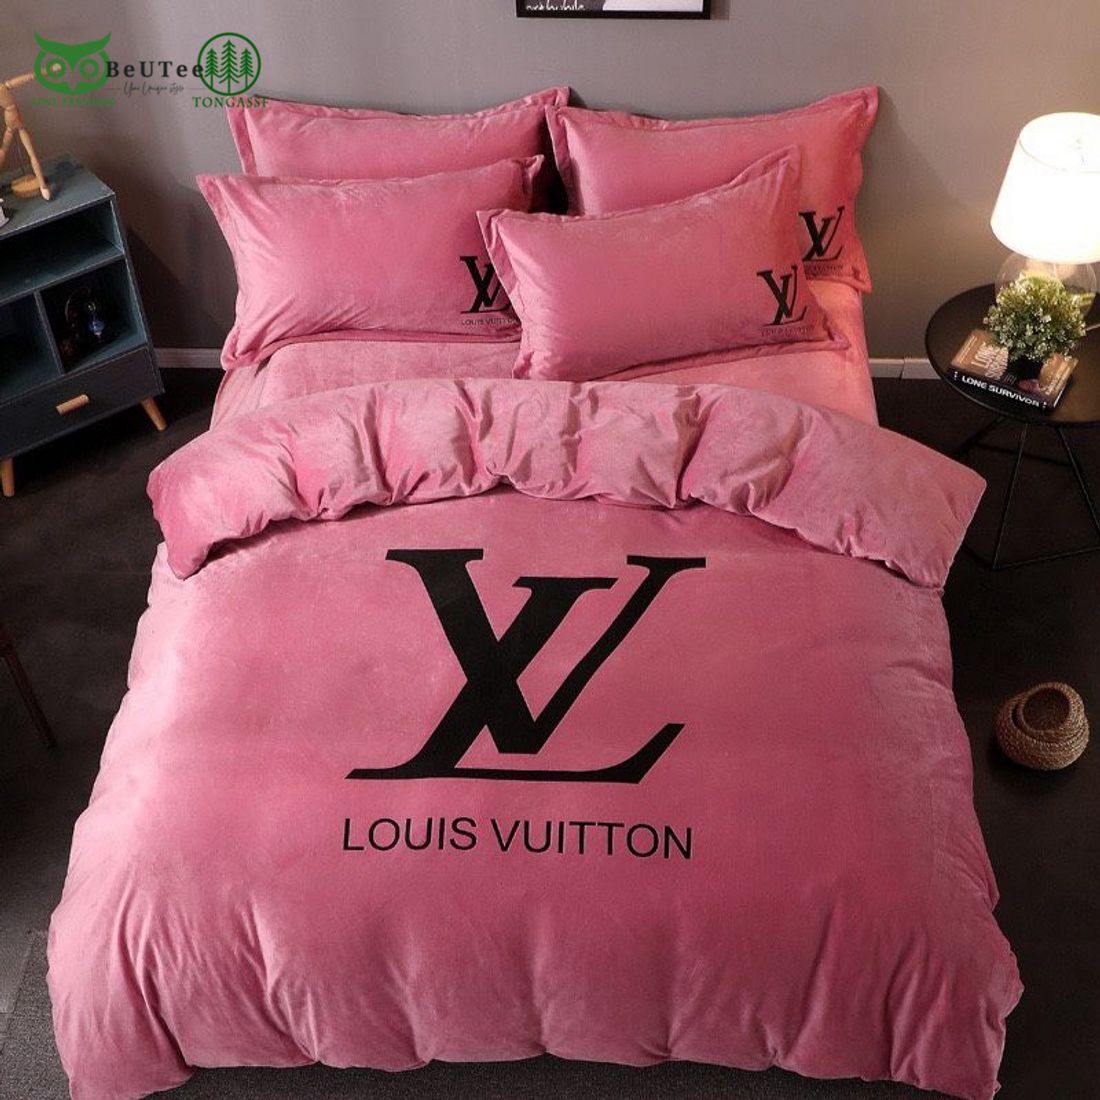 Louis Vuitton bedsheet set with comforter Furniture  Home Living Bedding   Towels on Carousell